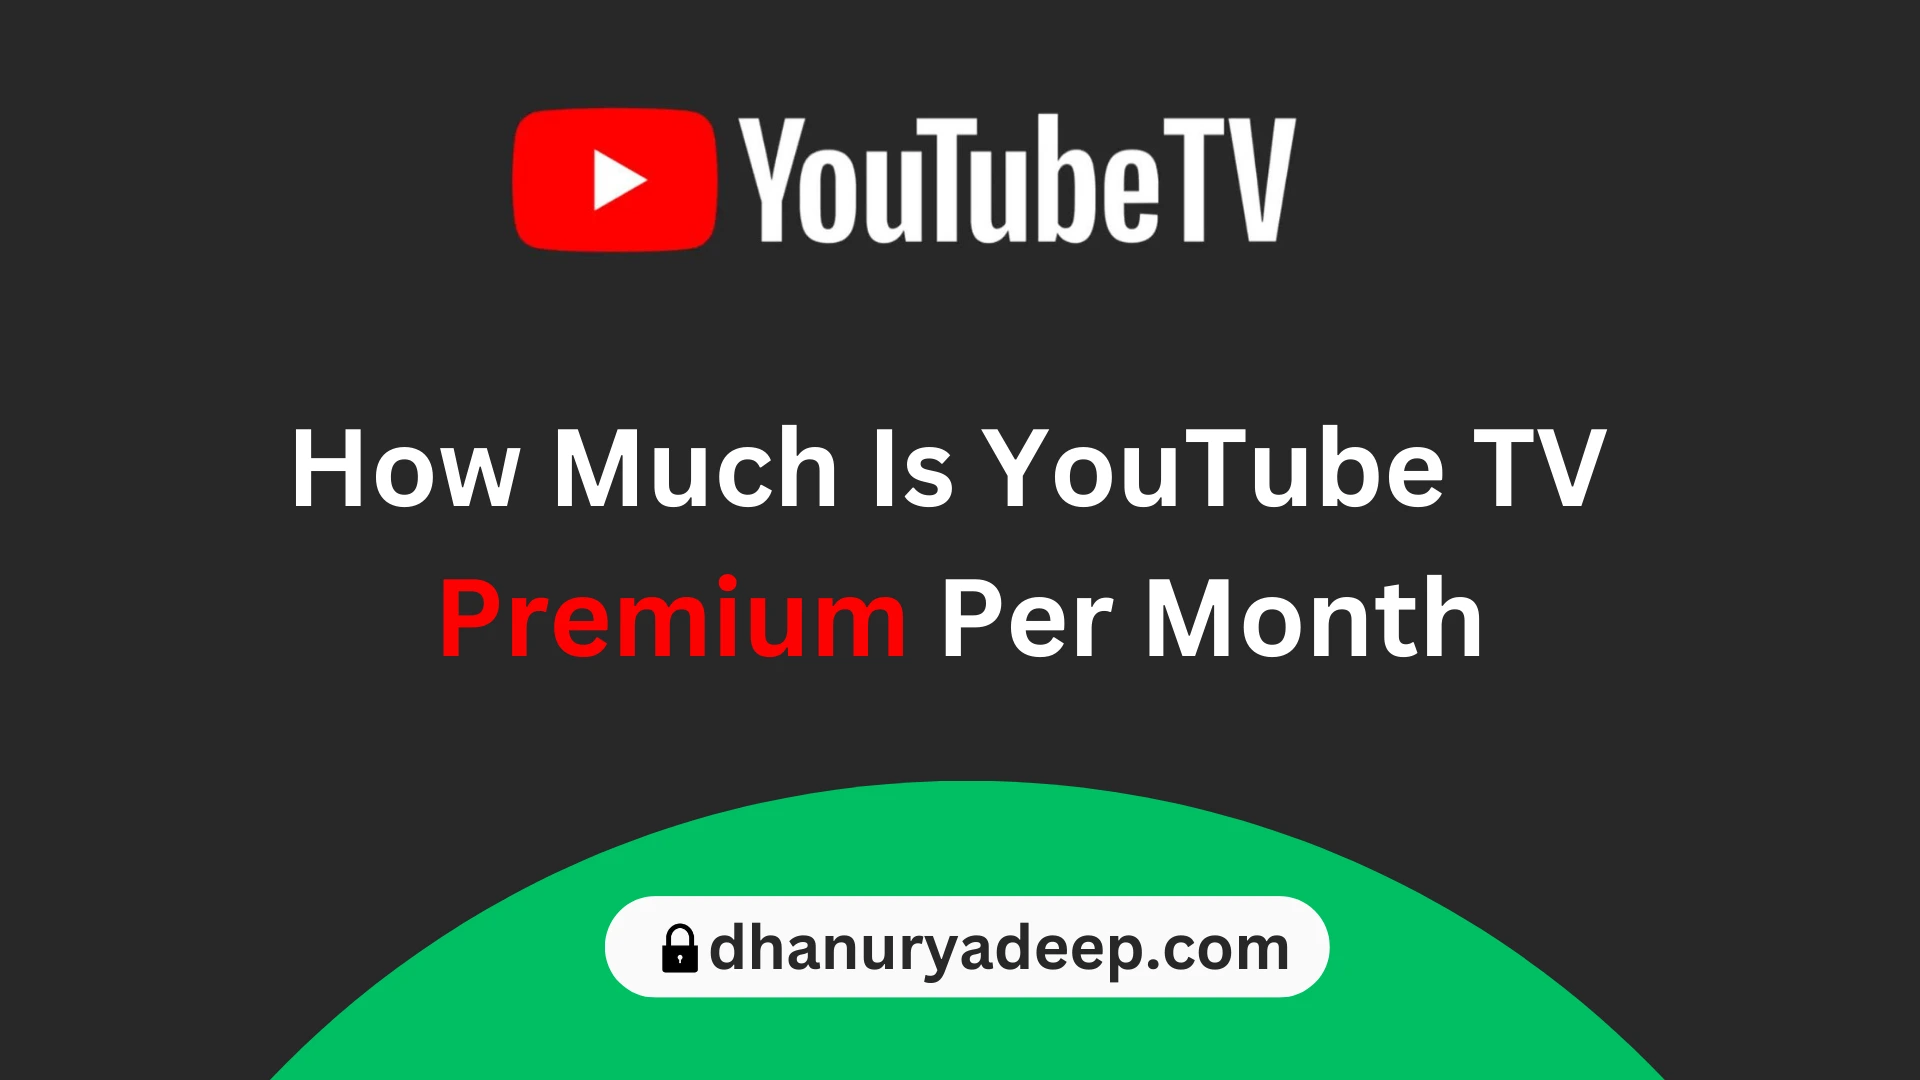 How Much Is YouTube TV Premium Per Month